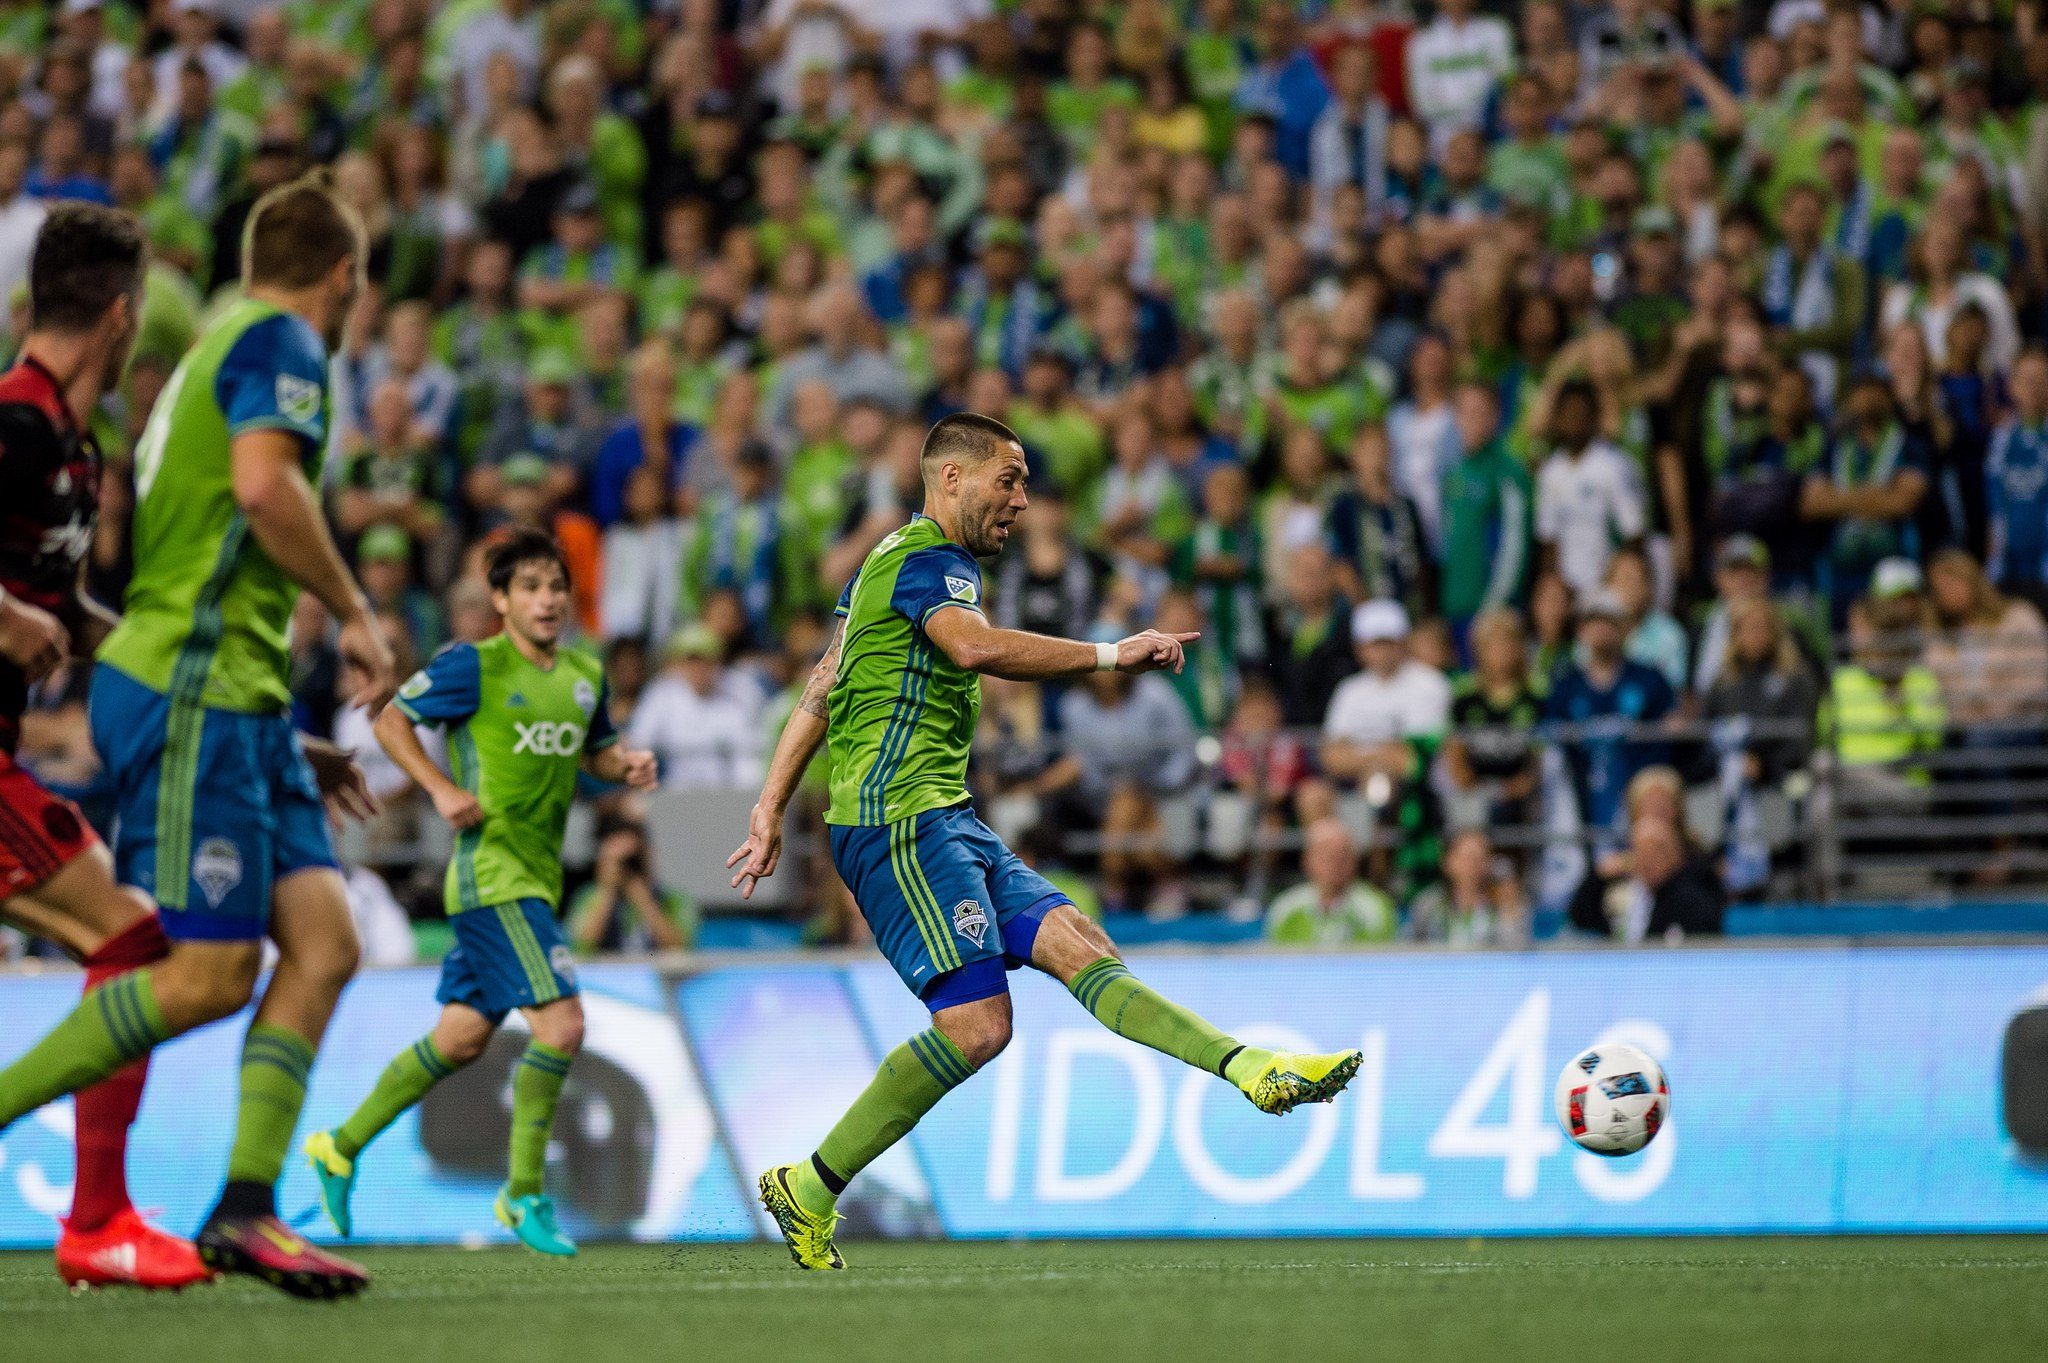 Sounders continue playoff push by beating Timbers